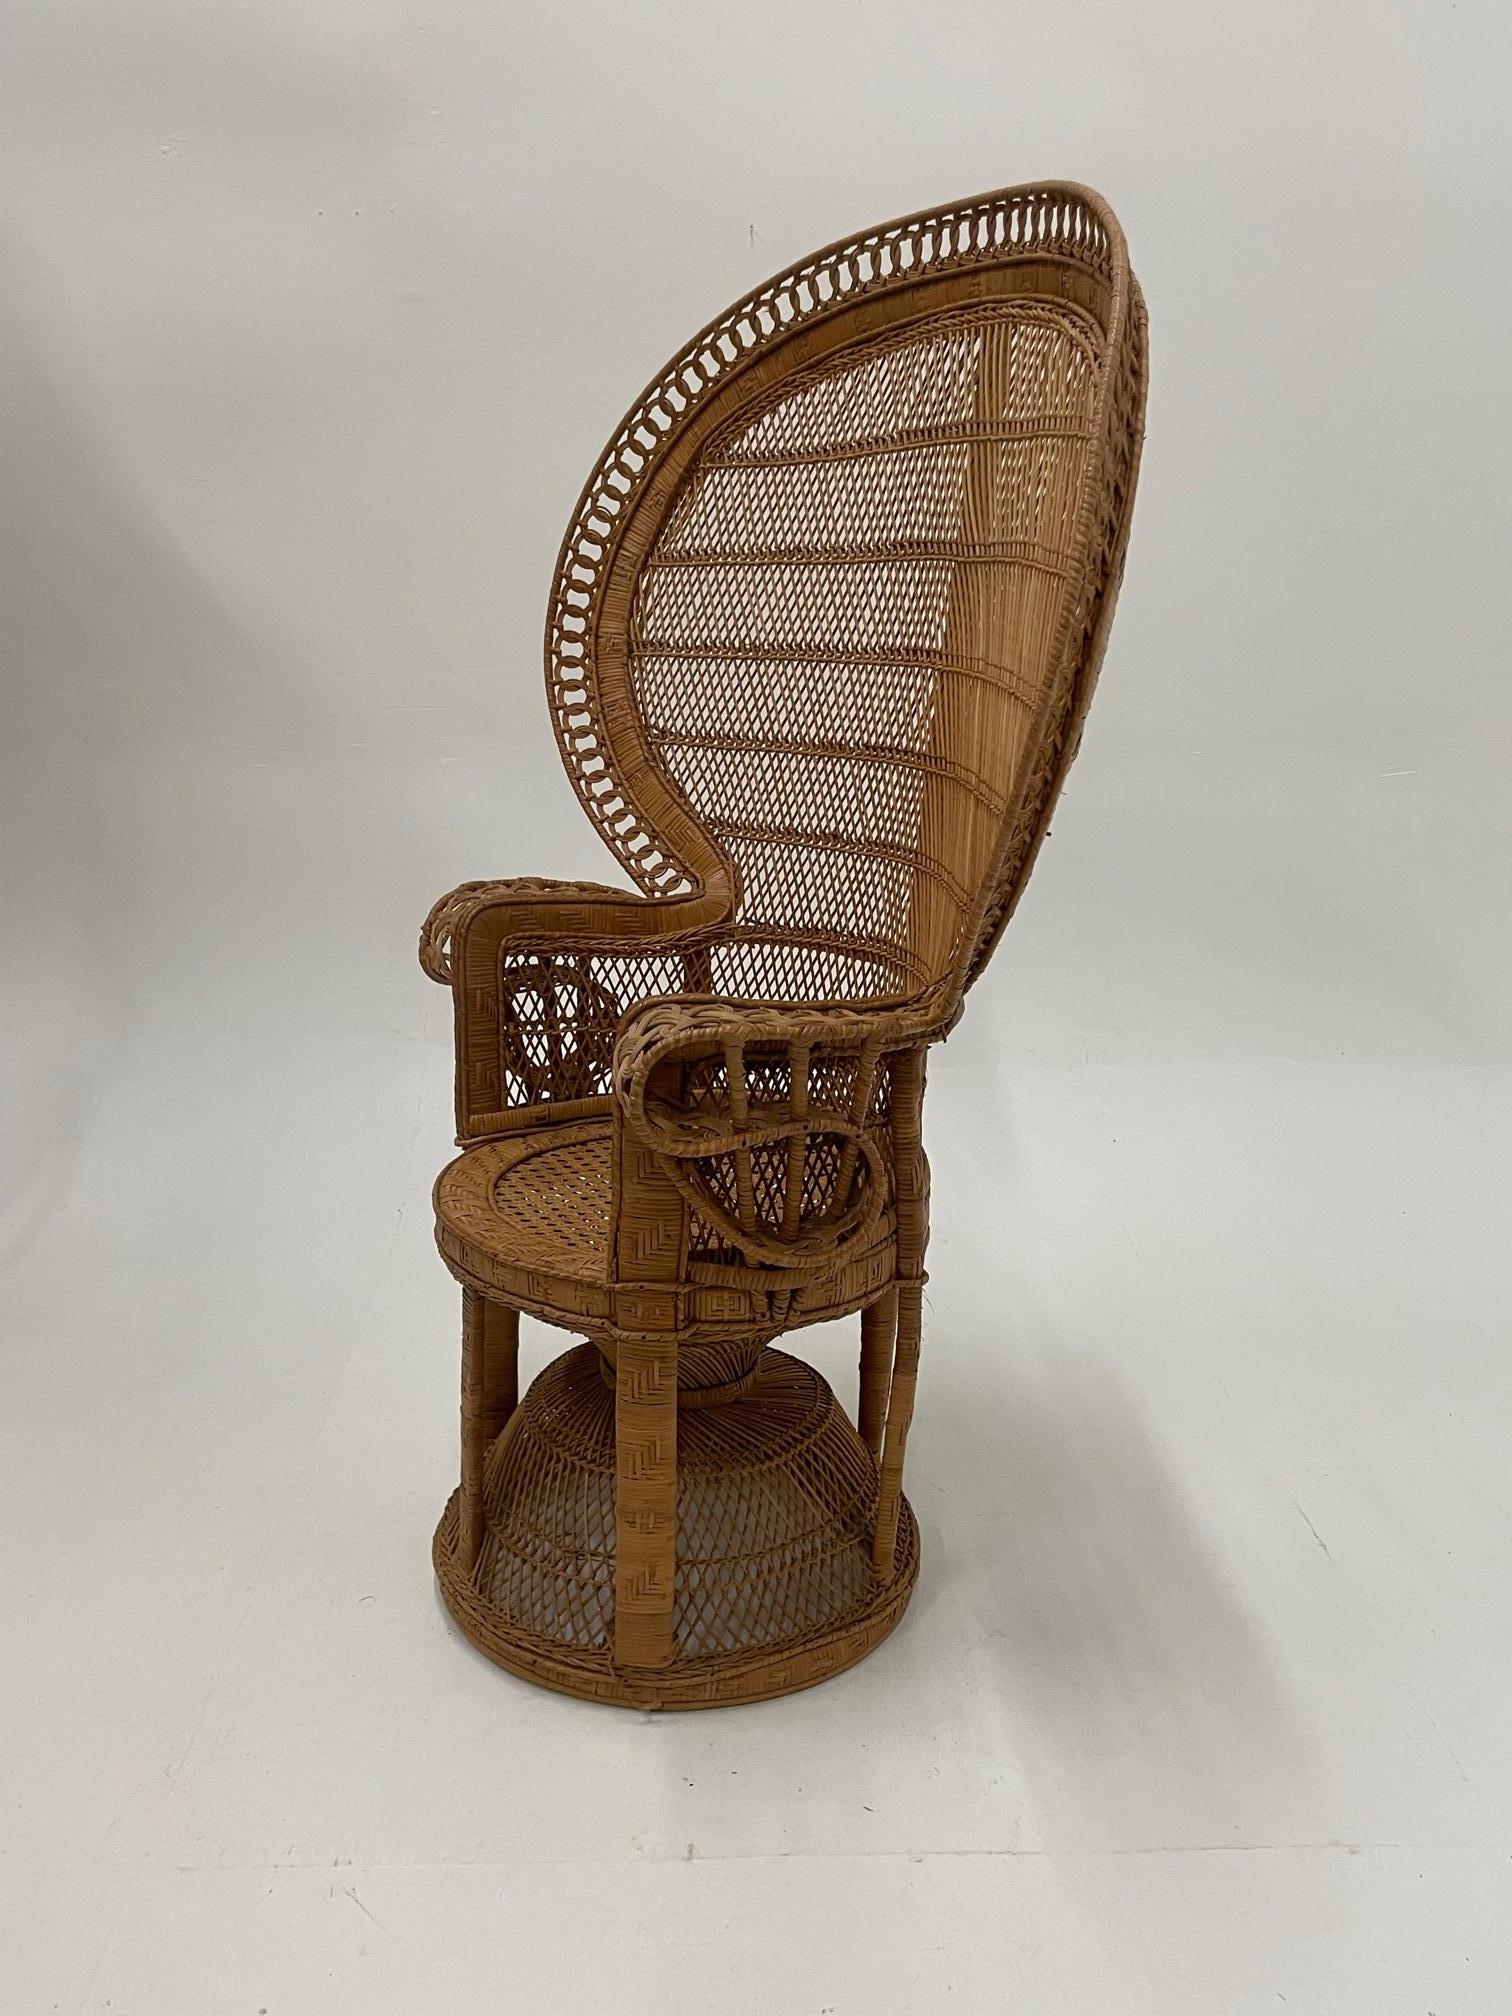 Attention stealer fabulous rattan peacock chair having iconic shape and style.
Measure: Arm height 29.